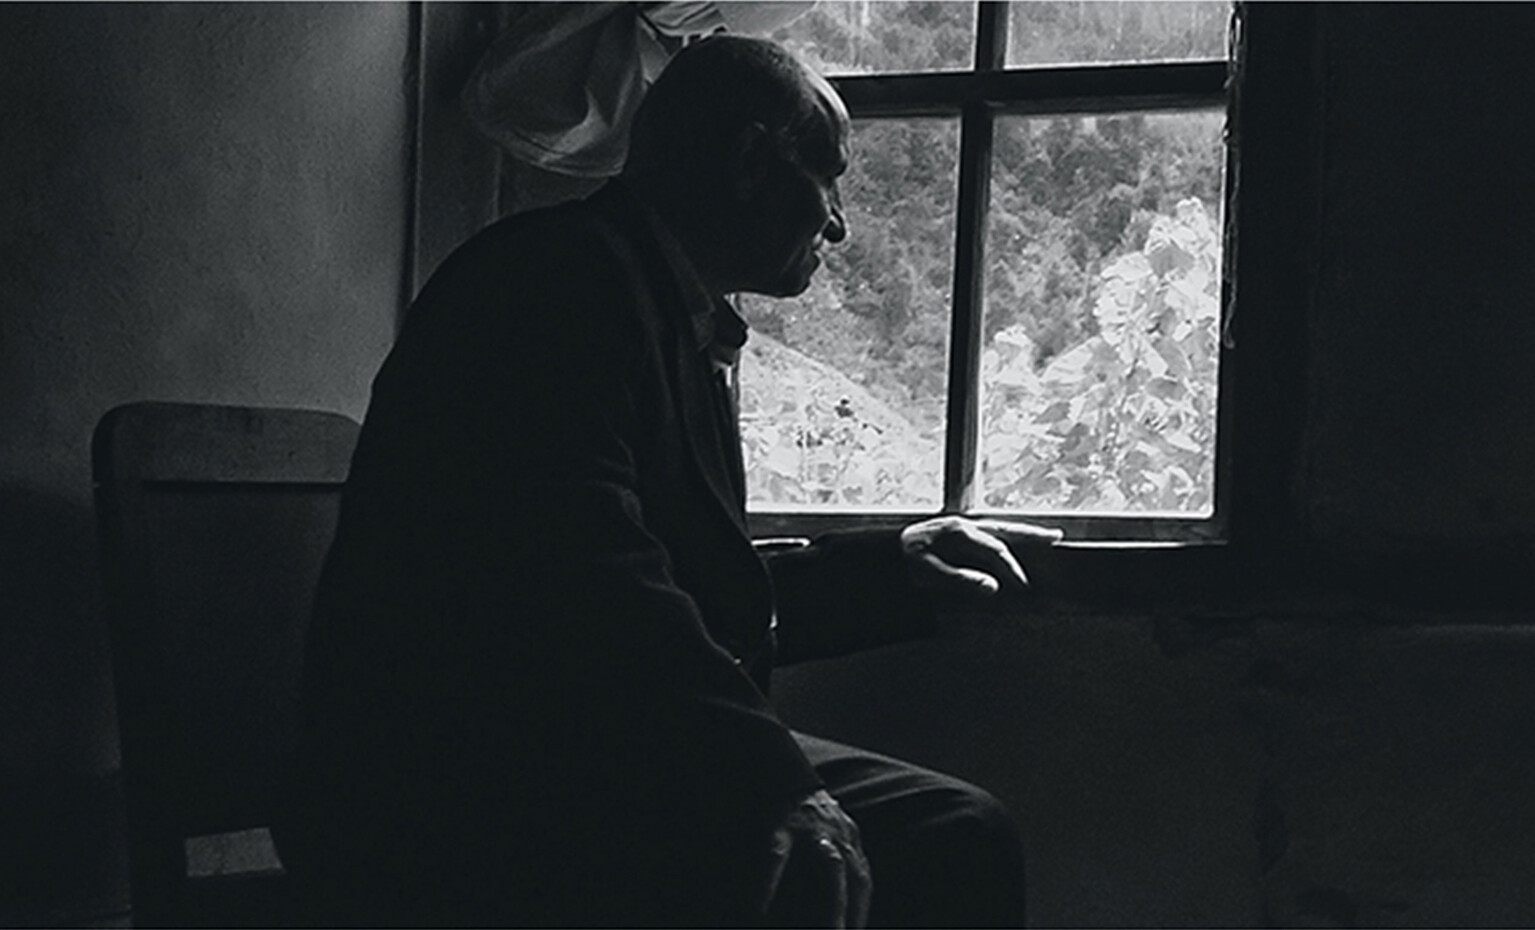 Black and white photograph of an elderly man in a dark corner of a house, looking out of the window. His hand is resting on the windowsill, almost like wanting to get in touch with the world outside.